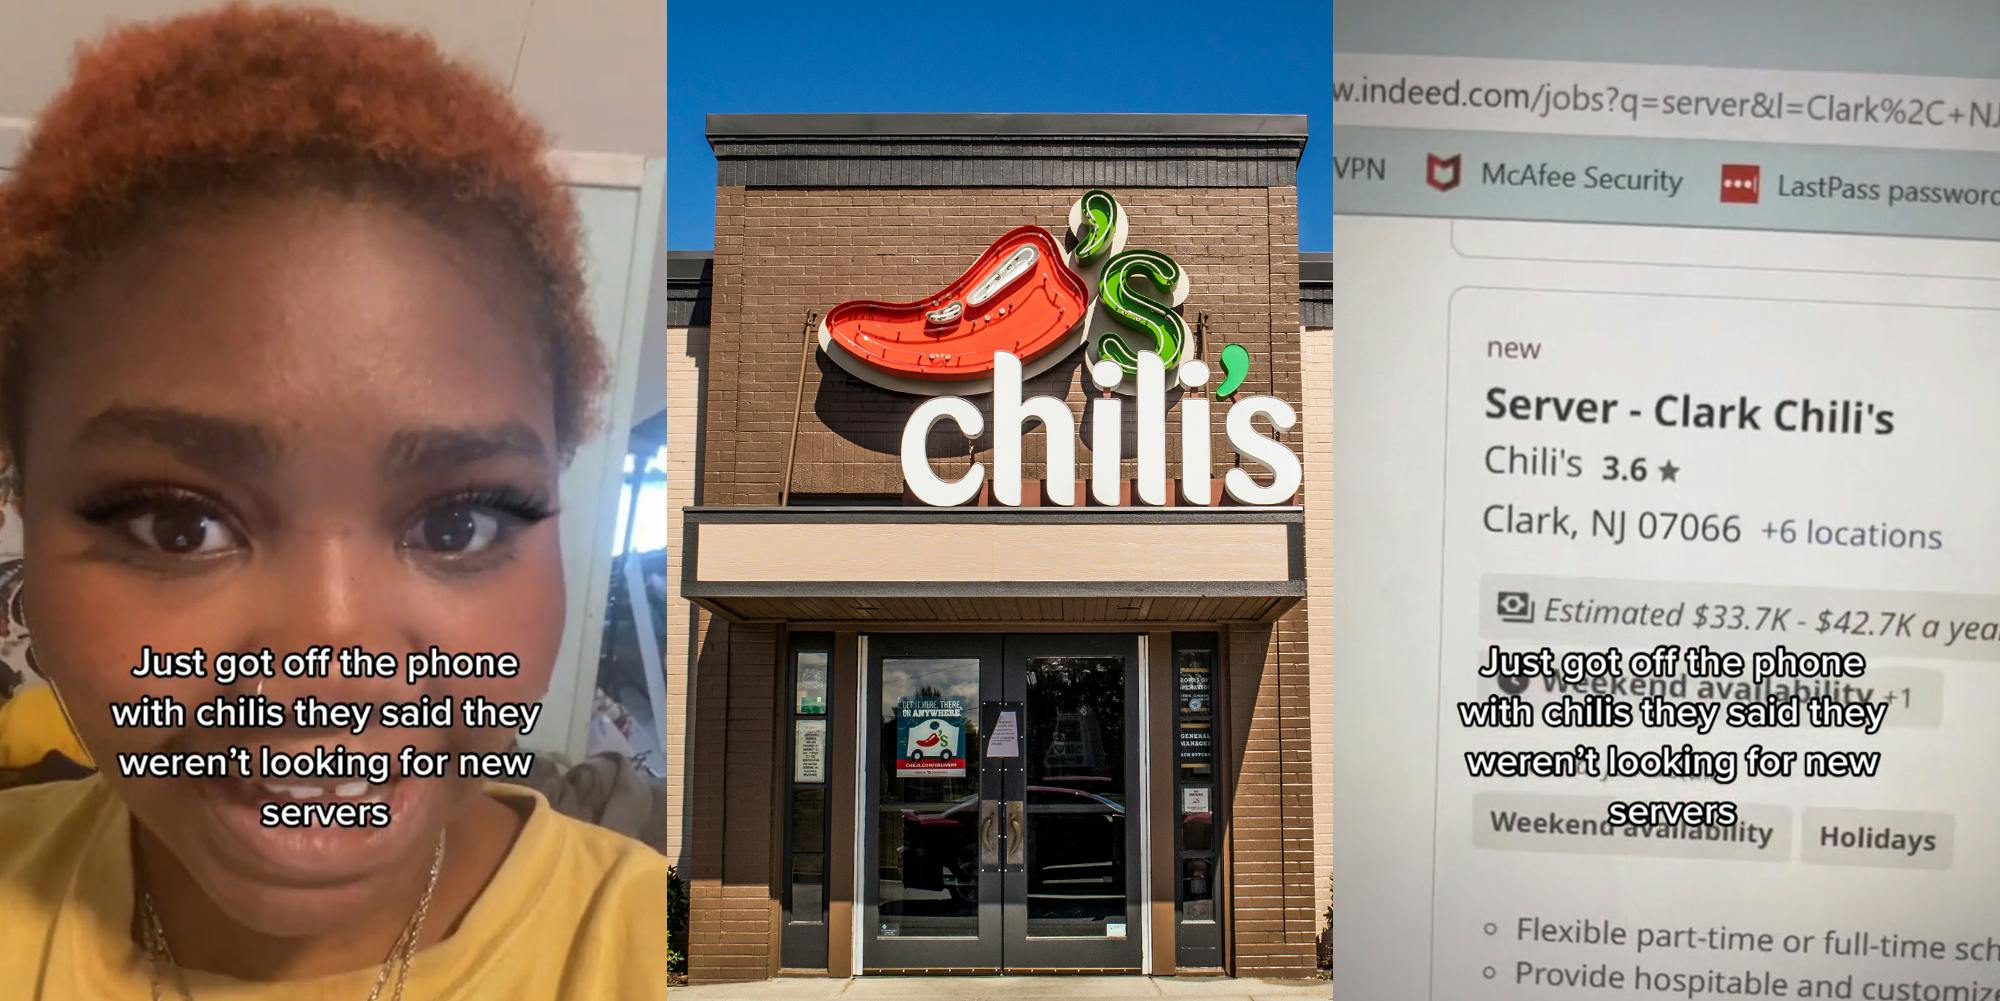 ‘Indeed be lying’: Job applicant says Chili’s manager told her they weren’t hiring servers—but there’s a job posting on Indeed